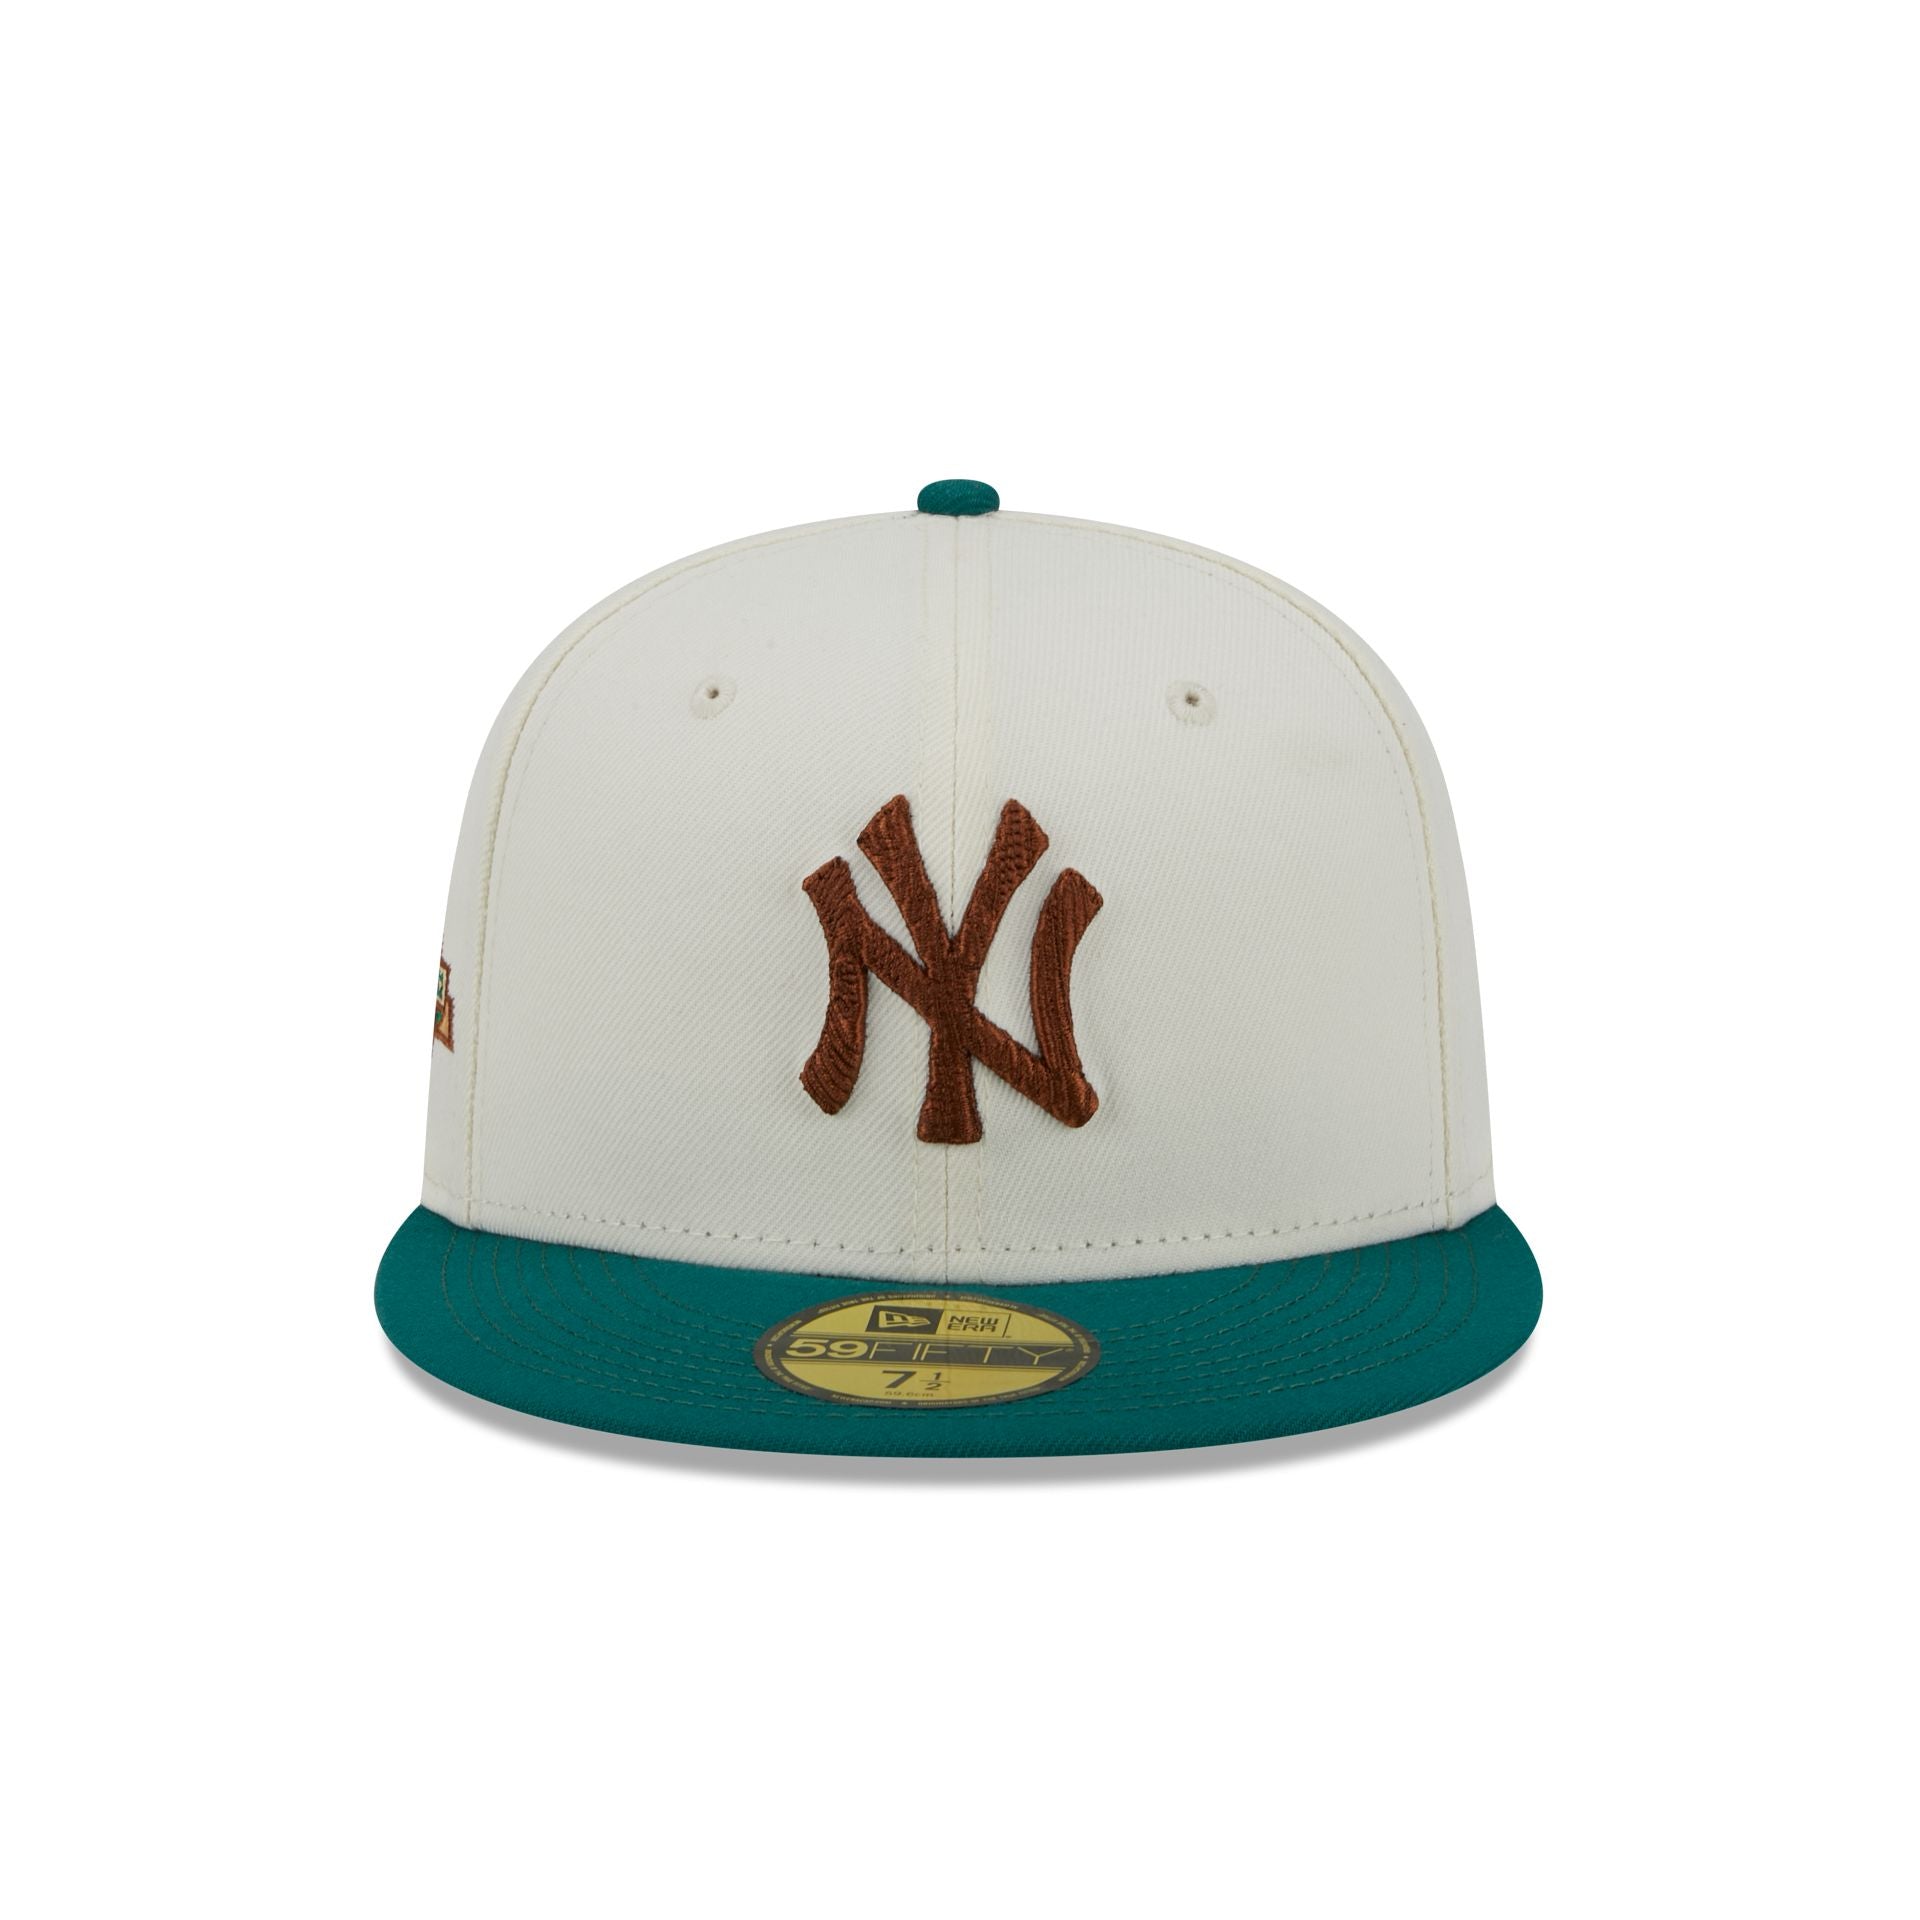 Era New Cap York Fitted New 59FIFTY – Hat Yankees Camp